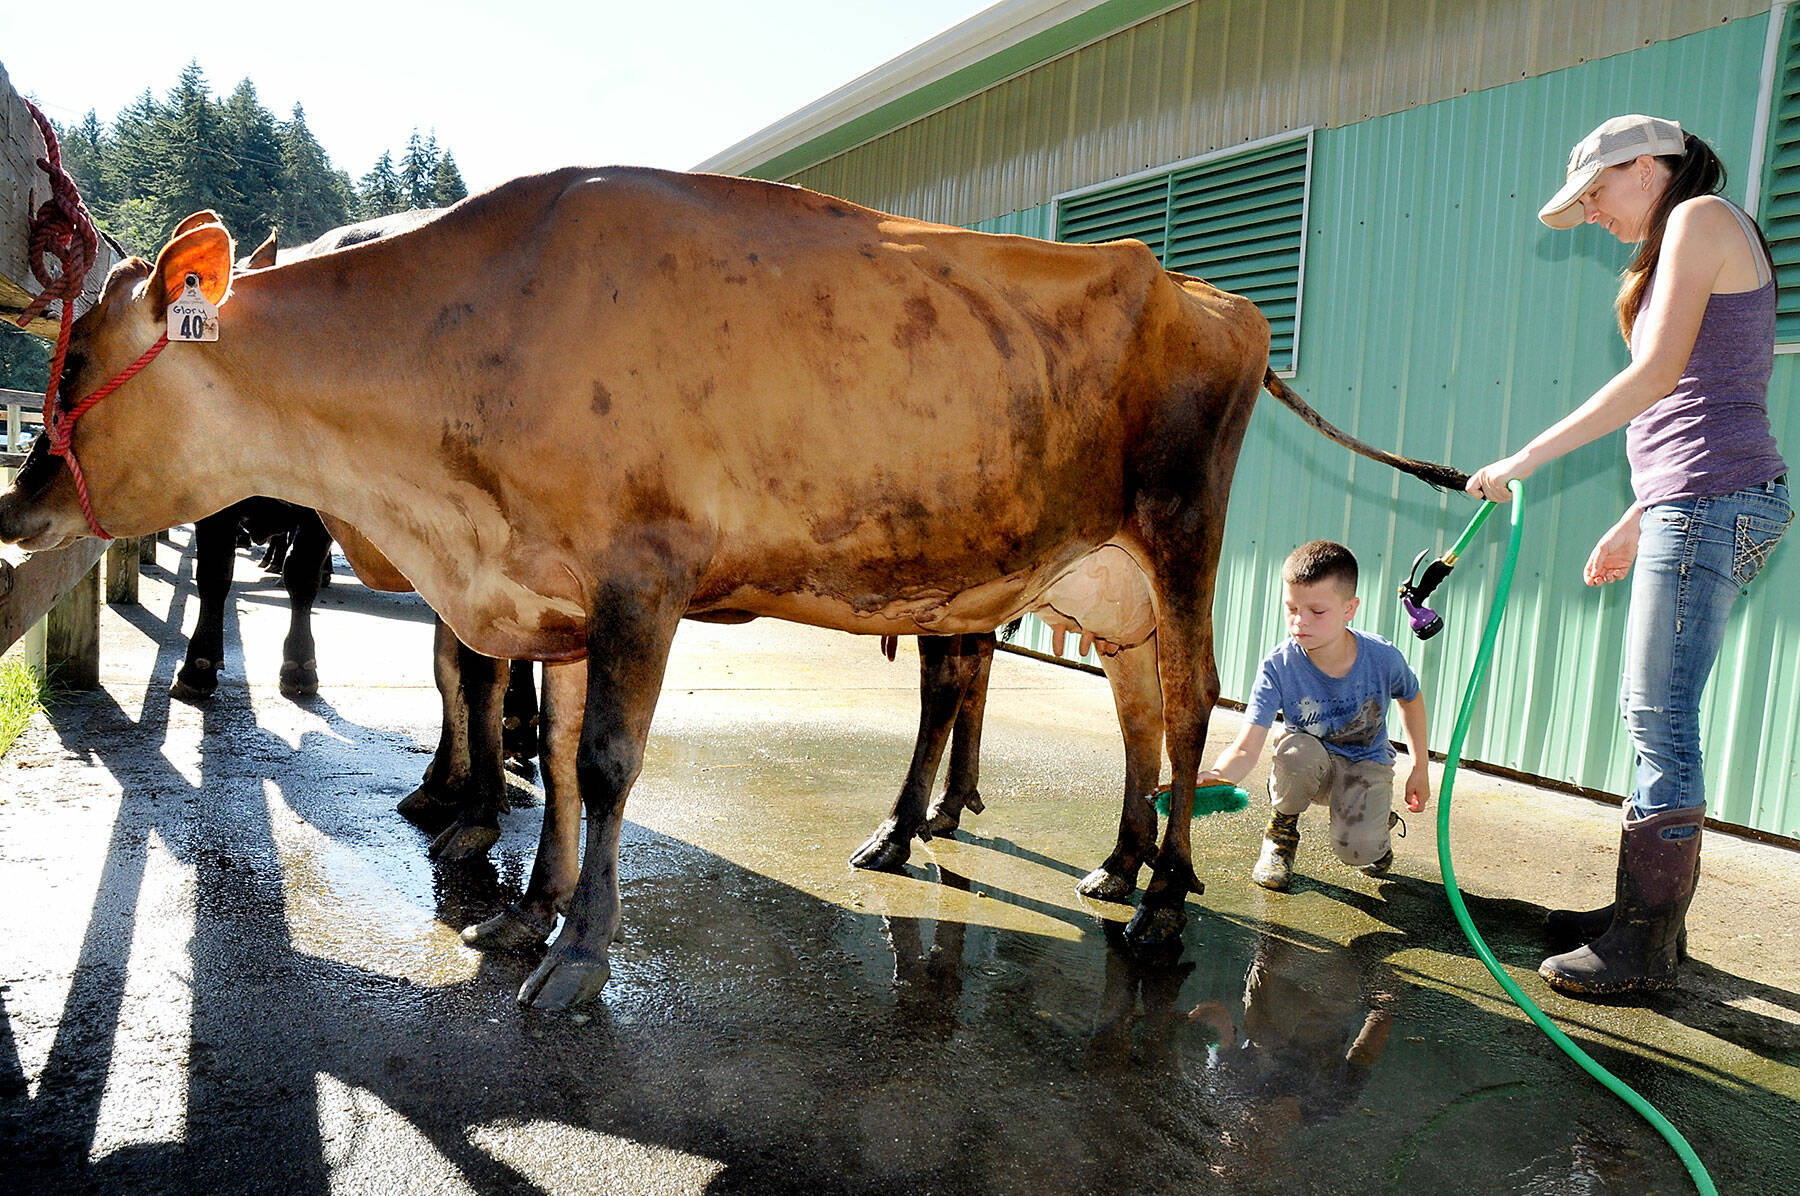 Tyler McCarthey, 10, of Sequim, a member of the East Clallam County Livestock 4H Club, scrubs the hind legs of Glory, a Jersey cow, as his mother, Sarah McCarthey, owner of Dungeness Valley Creamery, holds a tail during preparation for the Clallam County Fair on Wednesday in Port Angeles. The four-day exhibition opens today at the county fairgrounds. (Keith Thorpe/Peninsula Daily News)